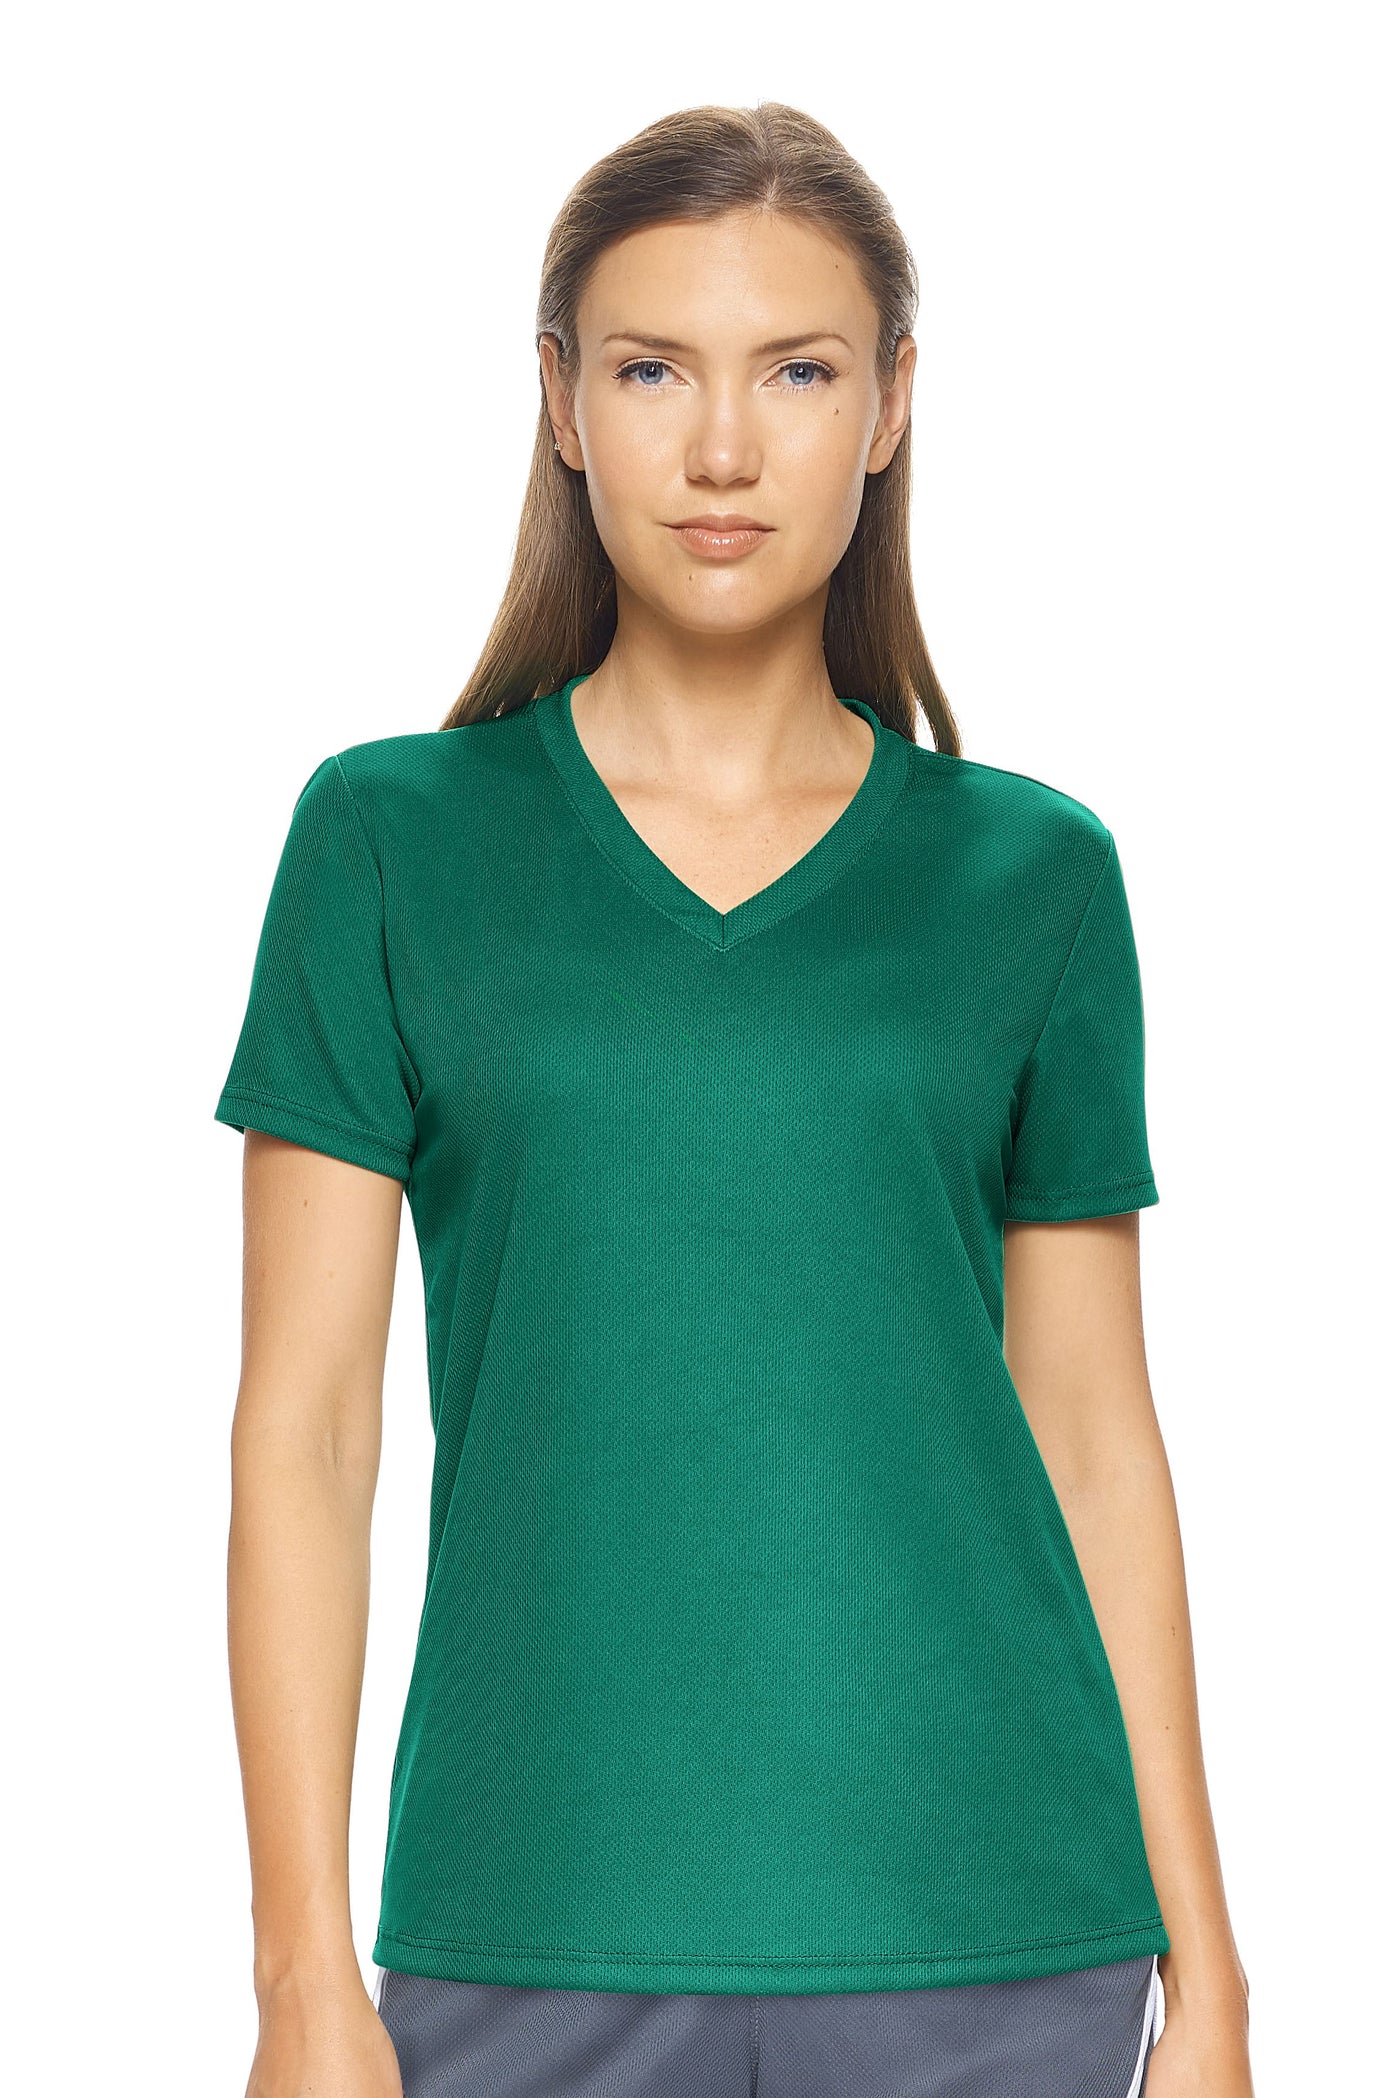 Expert Brand Retail Made in USA Sportswear Activewear Women's Short Sleeve V-neck Tec Tee Oxymesh forest green#color_forest-green